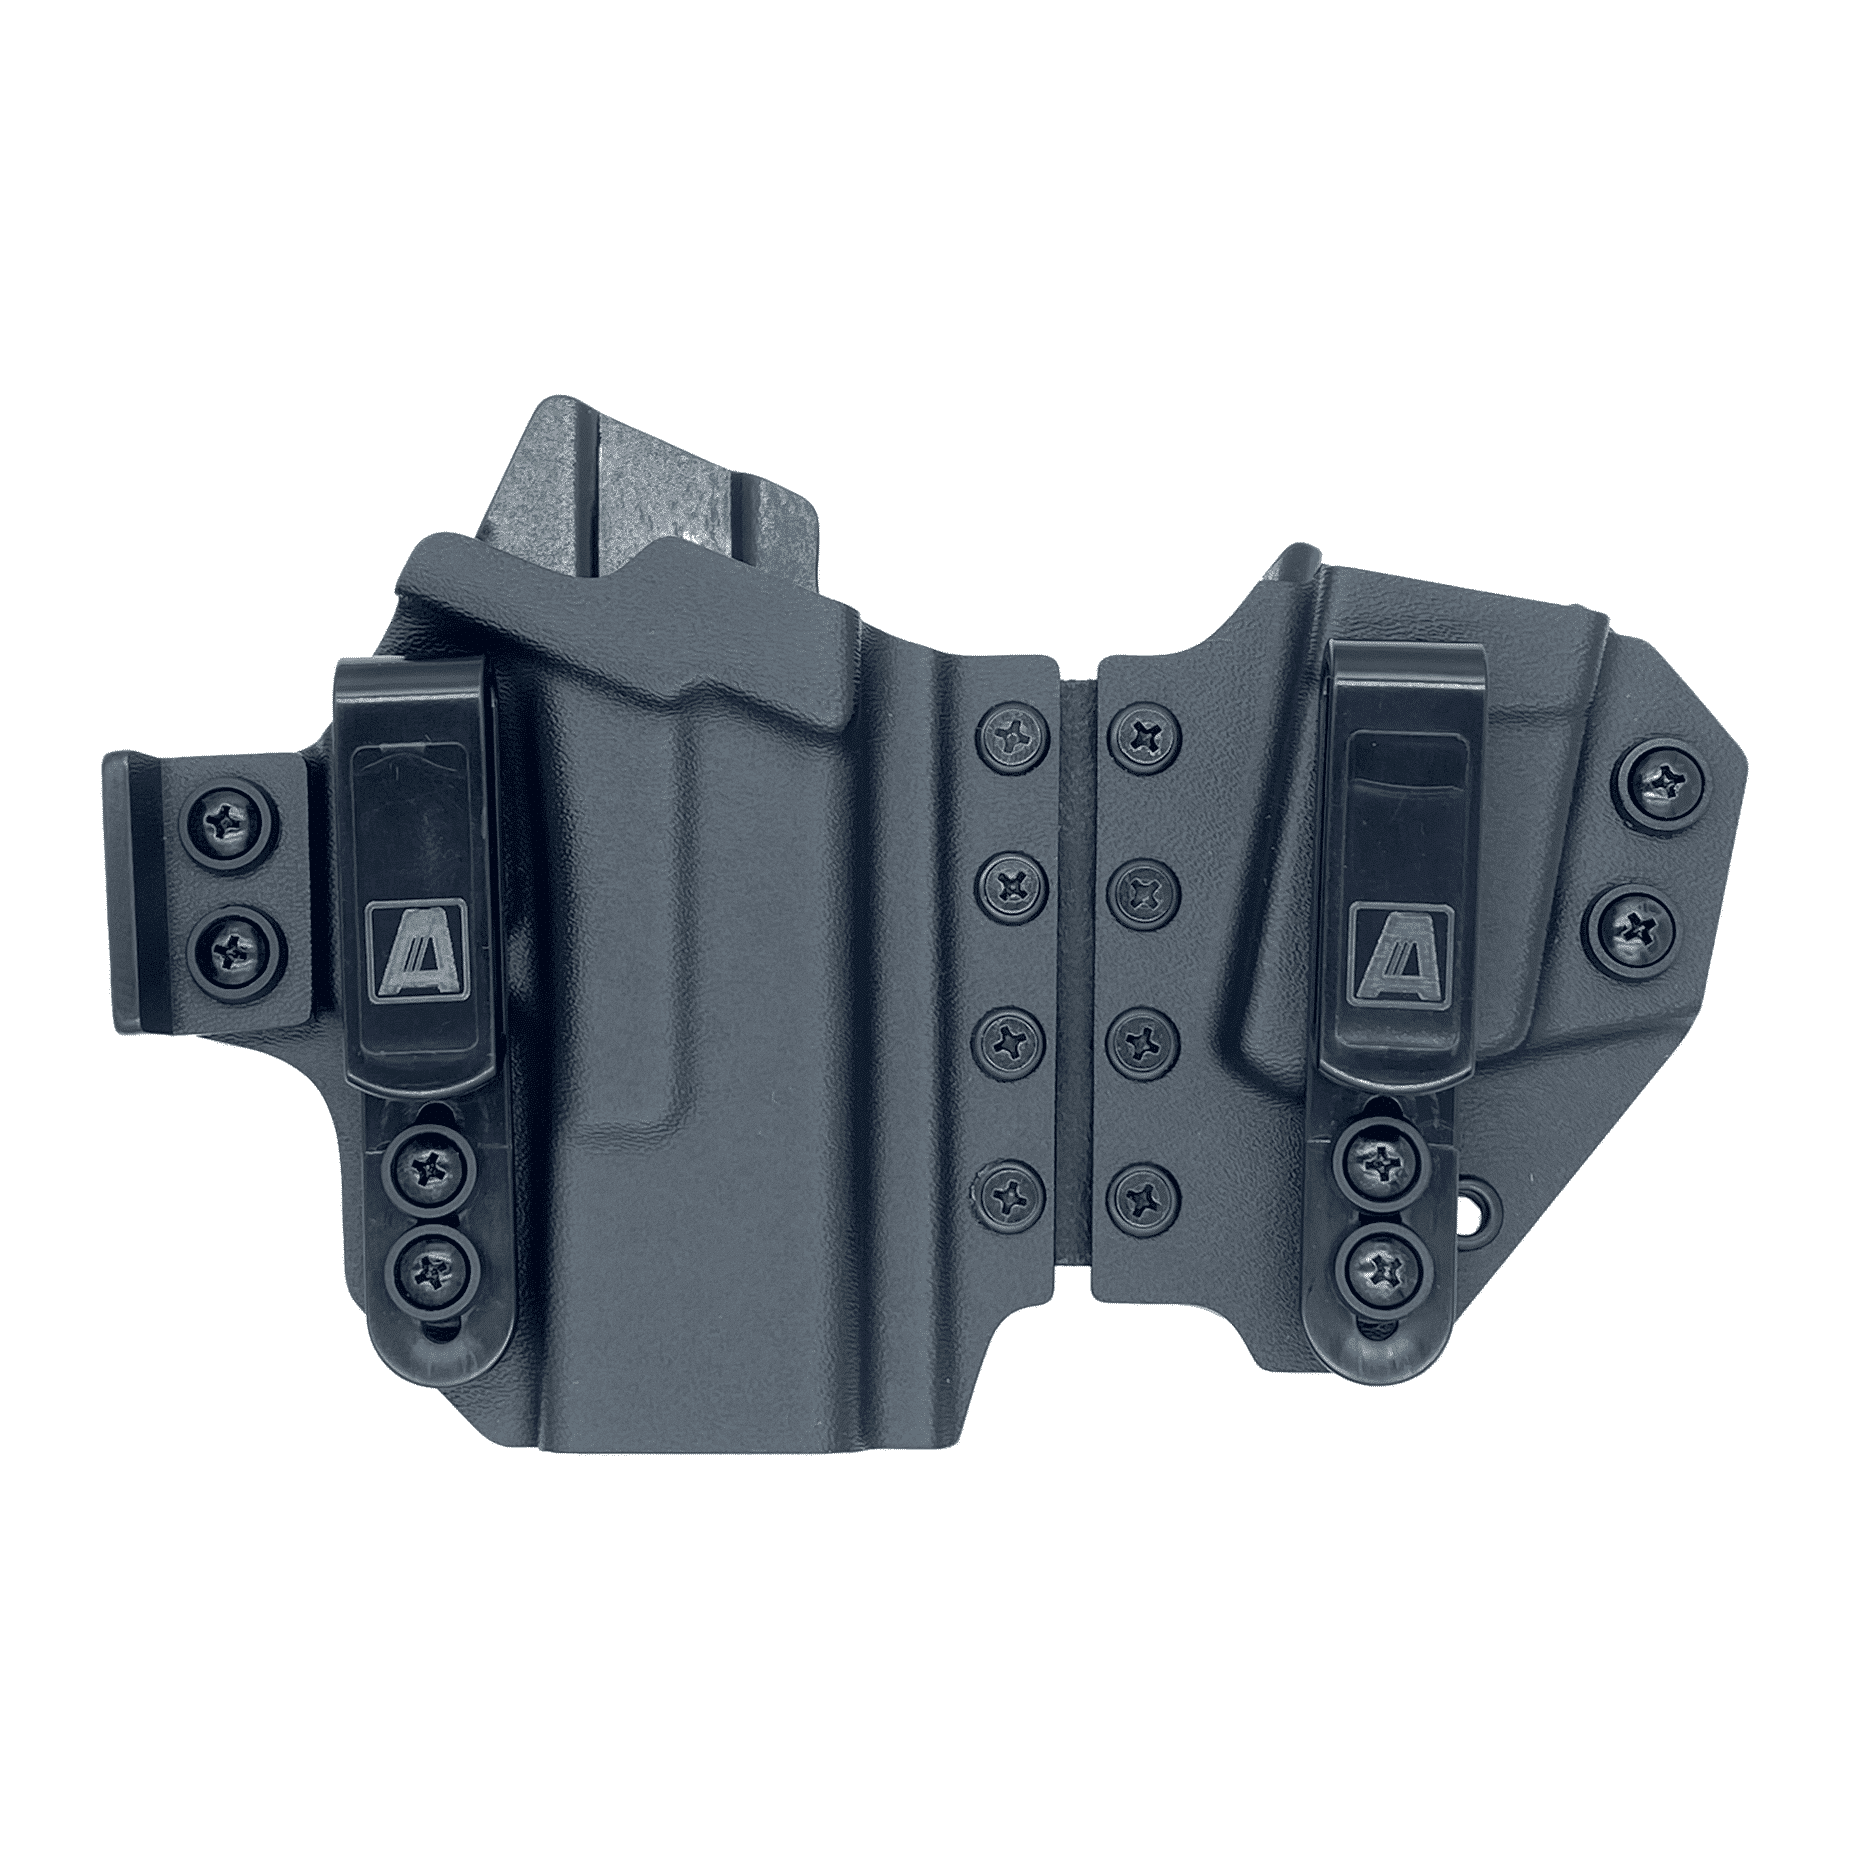 W-WING IWB HOLSTER